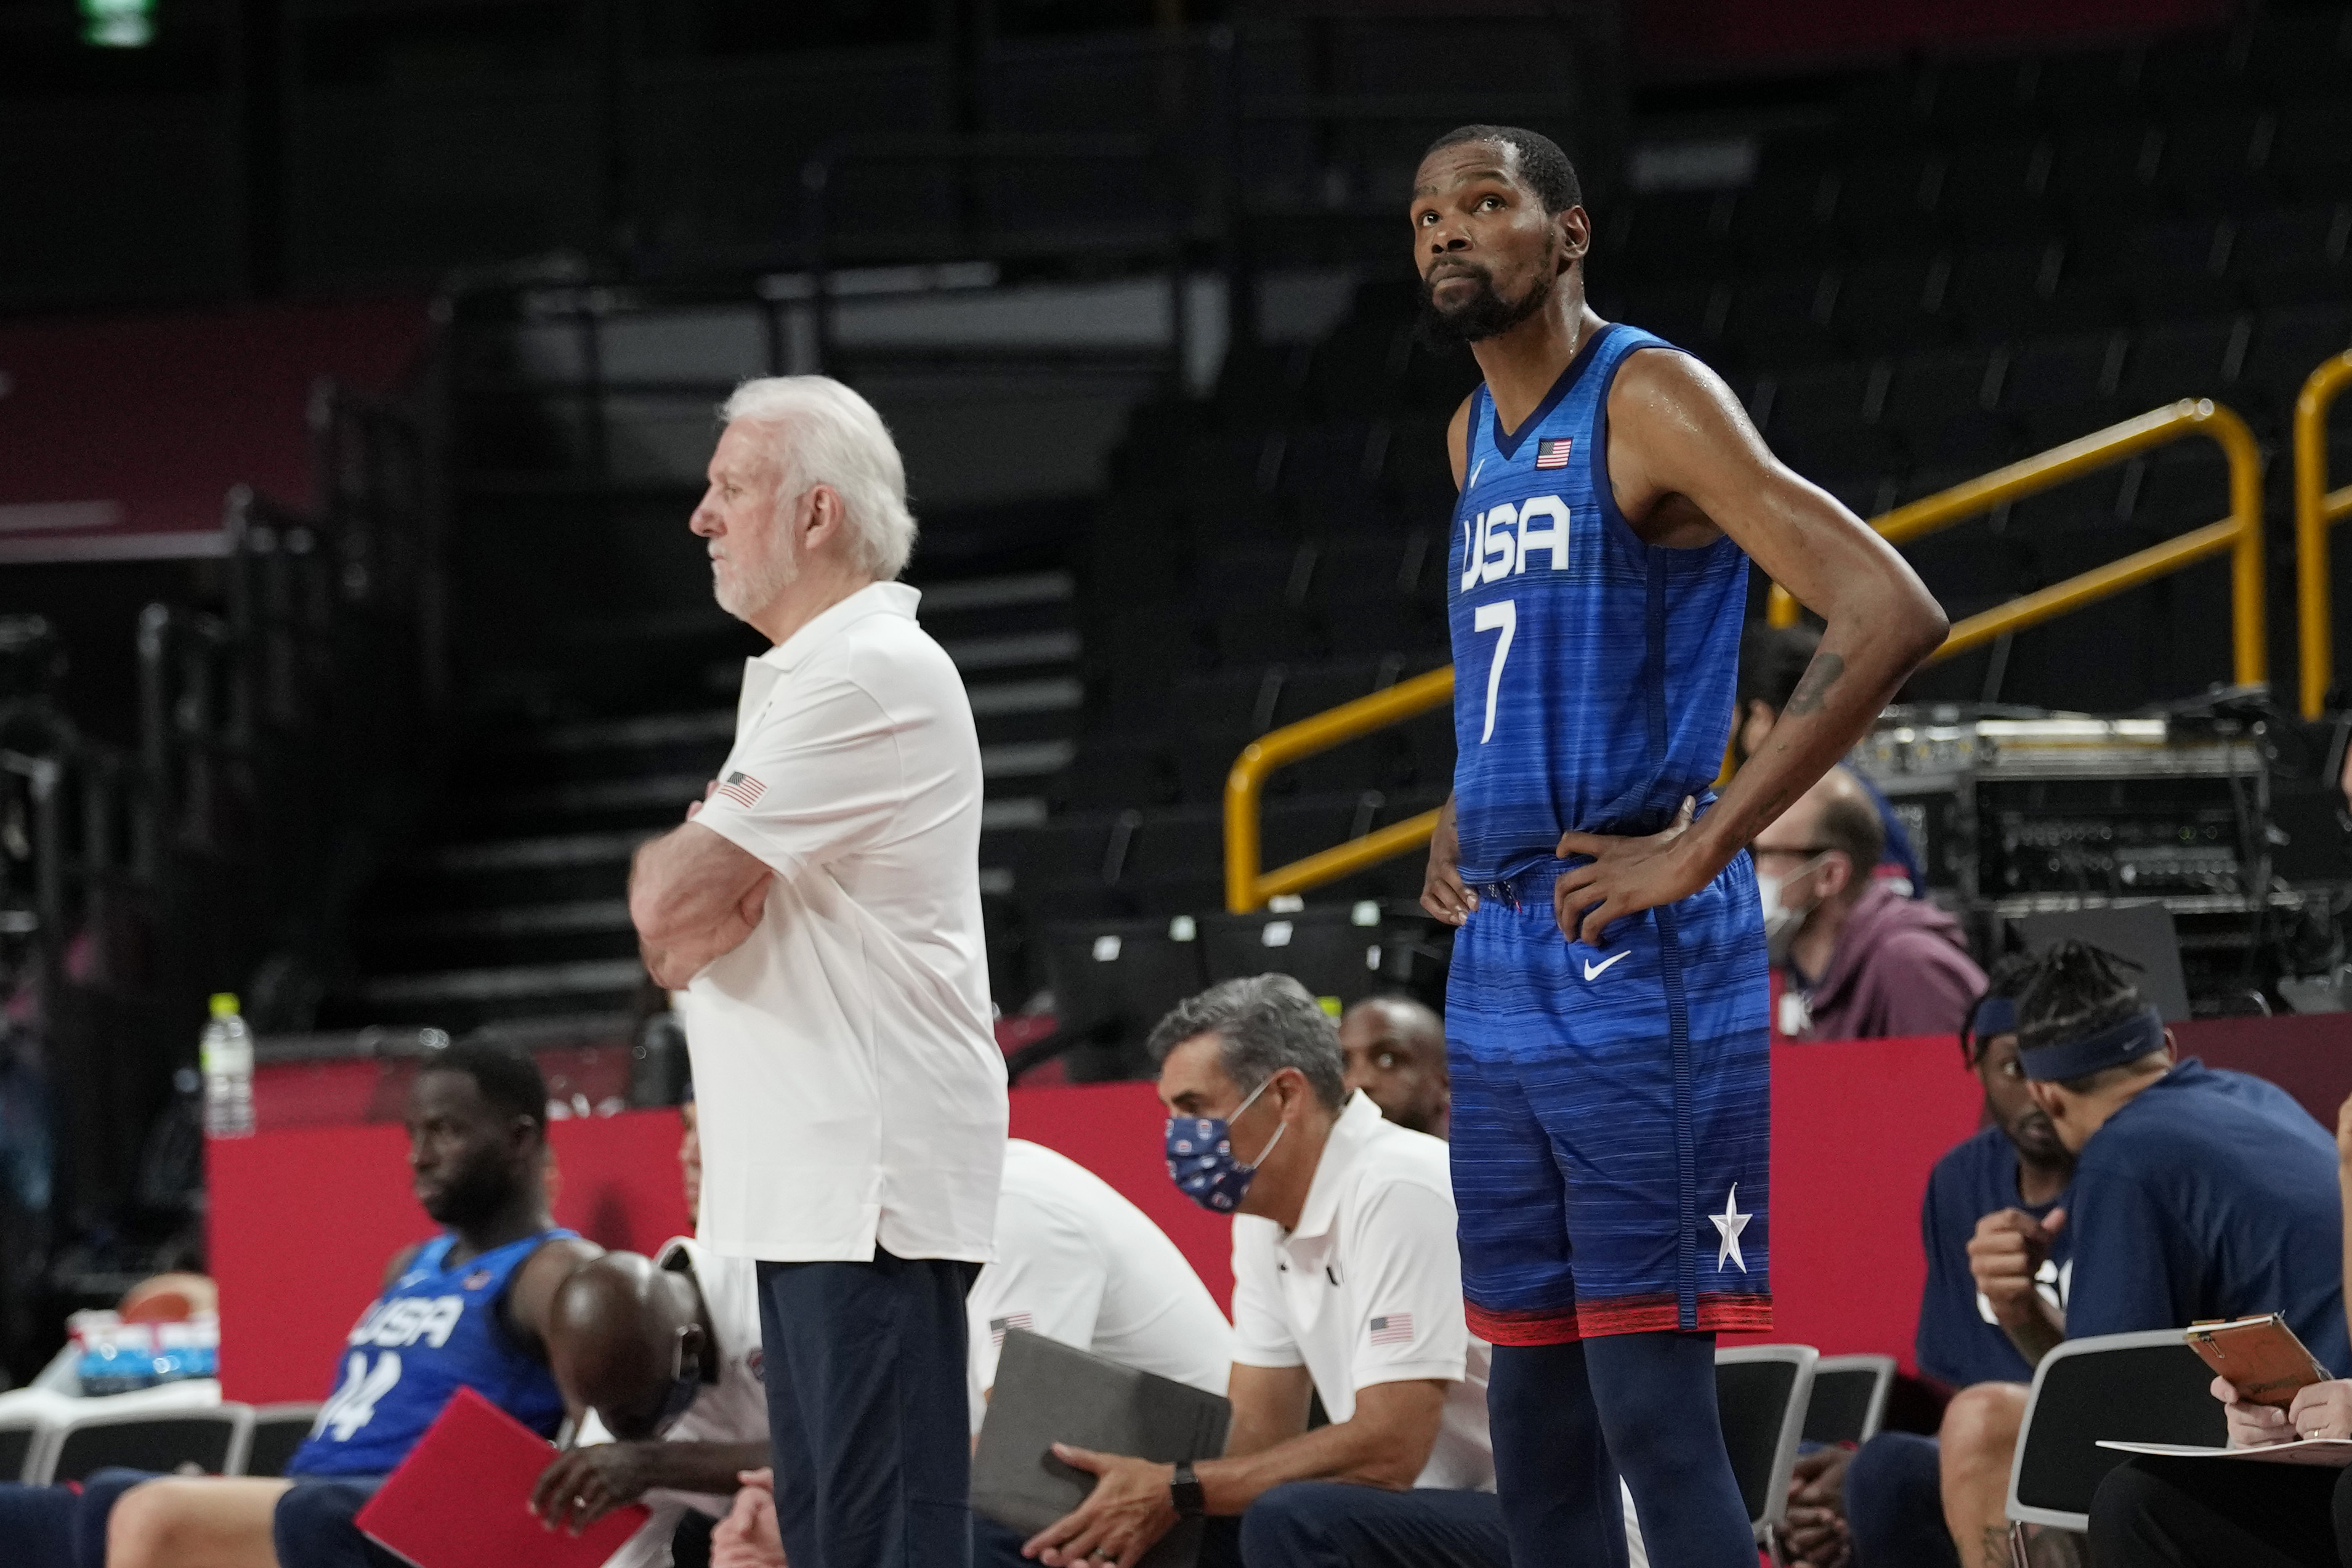 US Men's Basketball loses to France 83-76, 25-game Olympic win streak ends